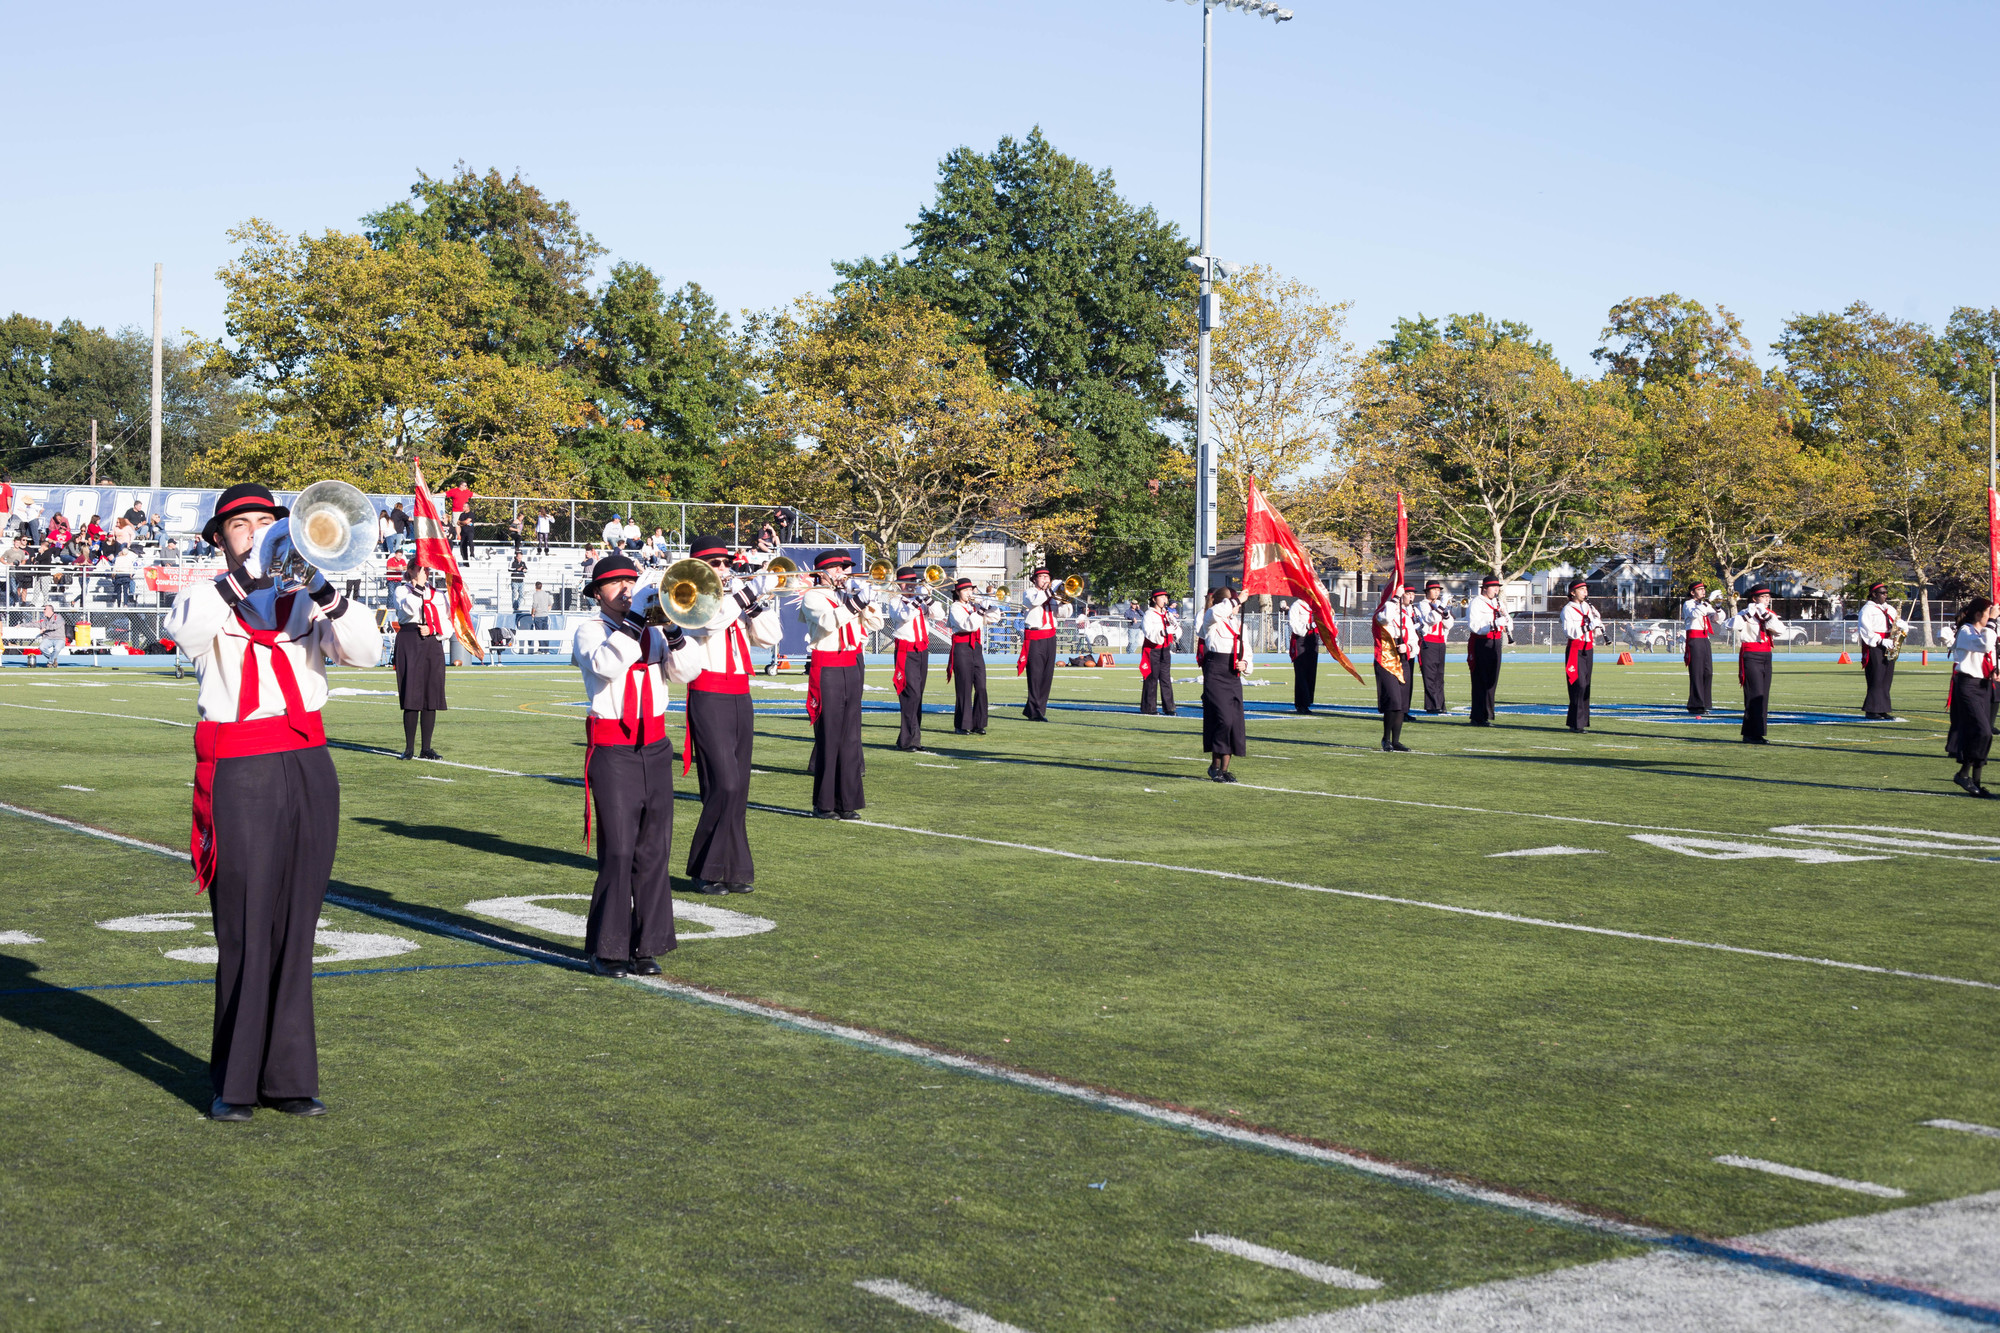 The marching band put on a show at halftime.